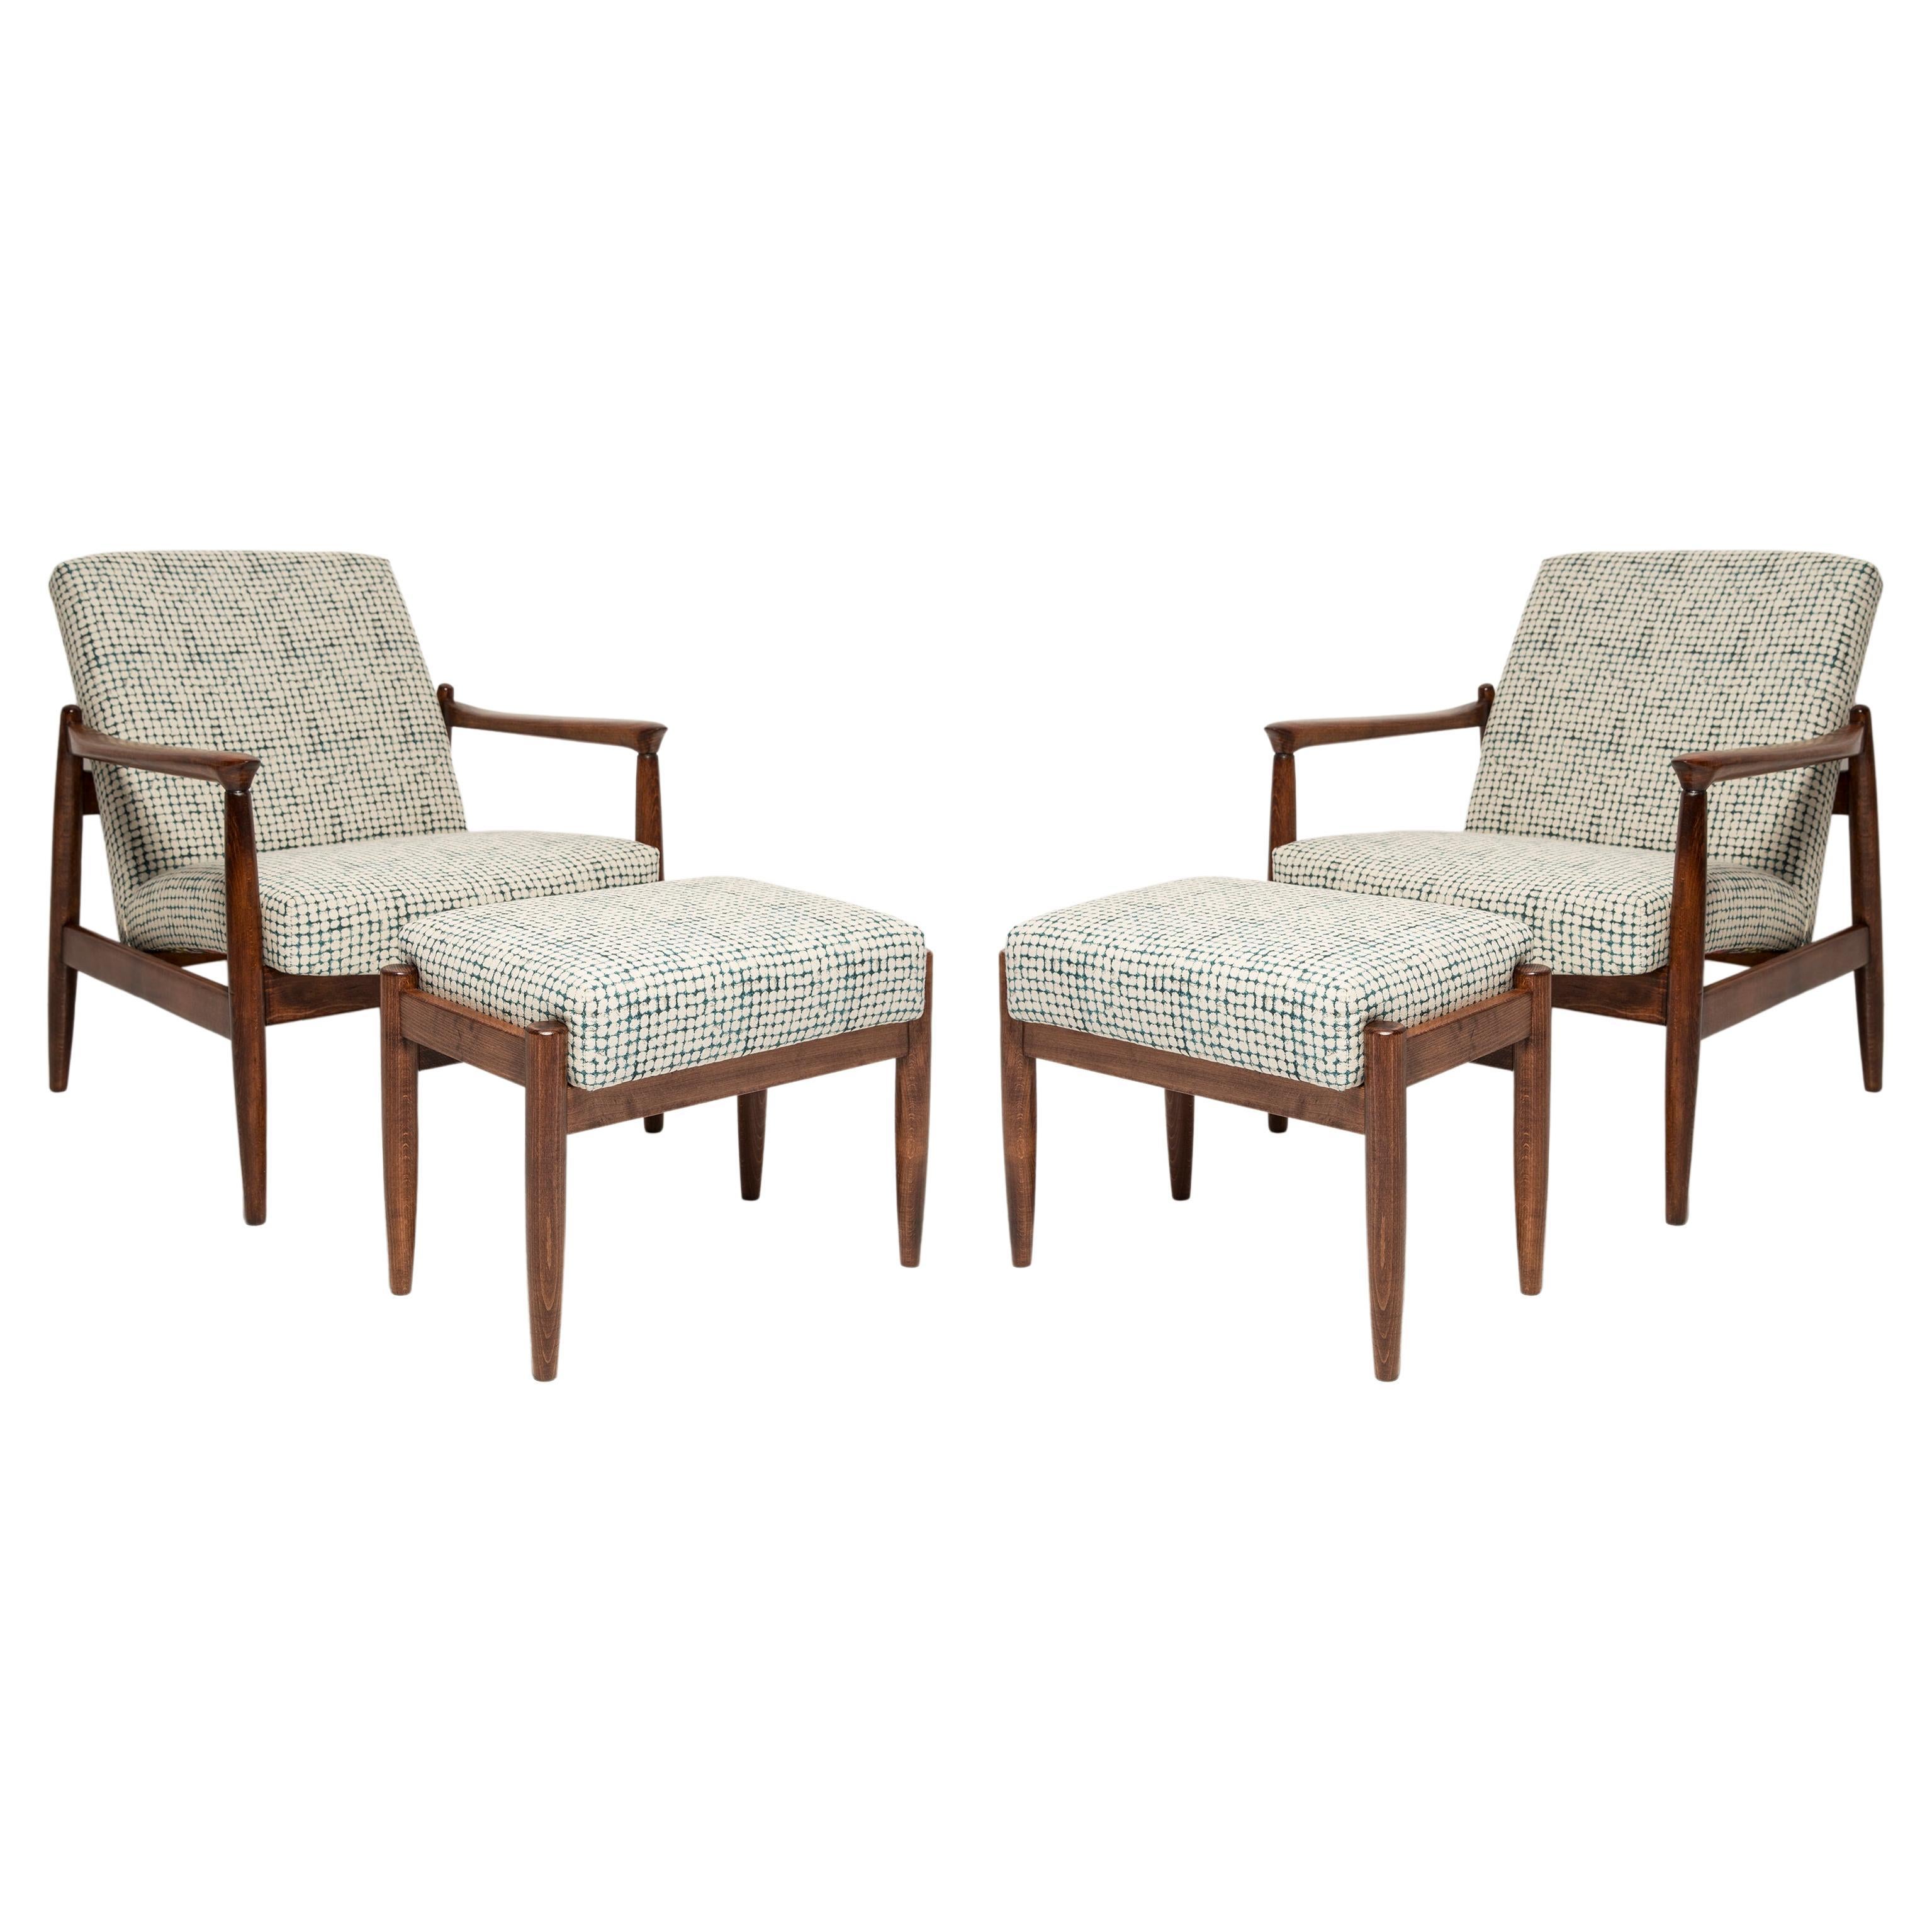 Set of Mid Century White and Aqua Armchairs and Stools, Edmund Homa, Europe, 1960s For Sale